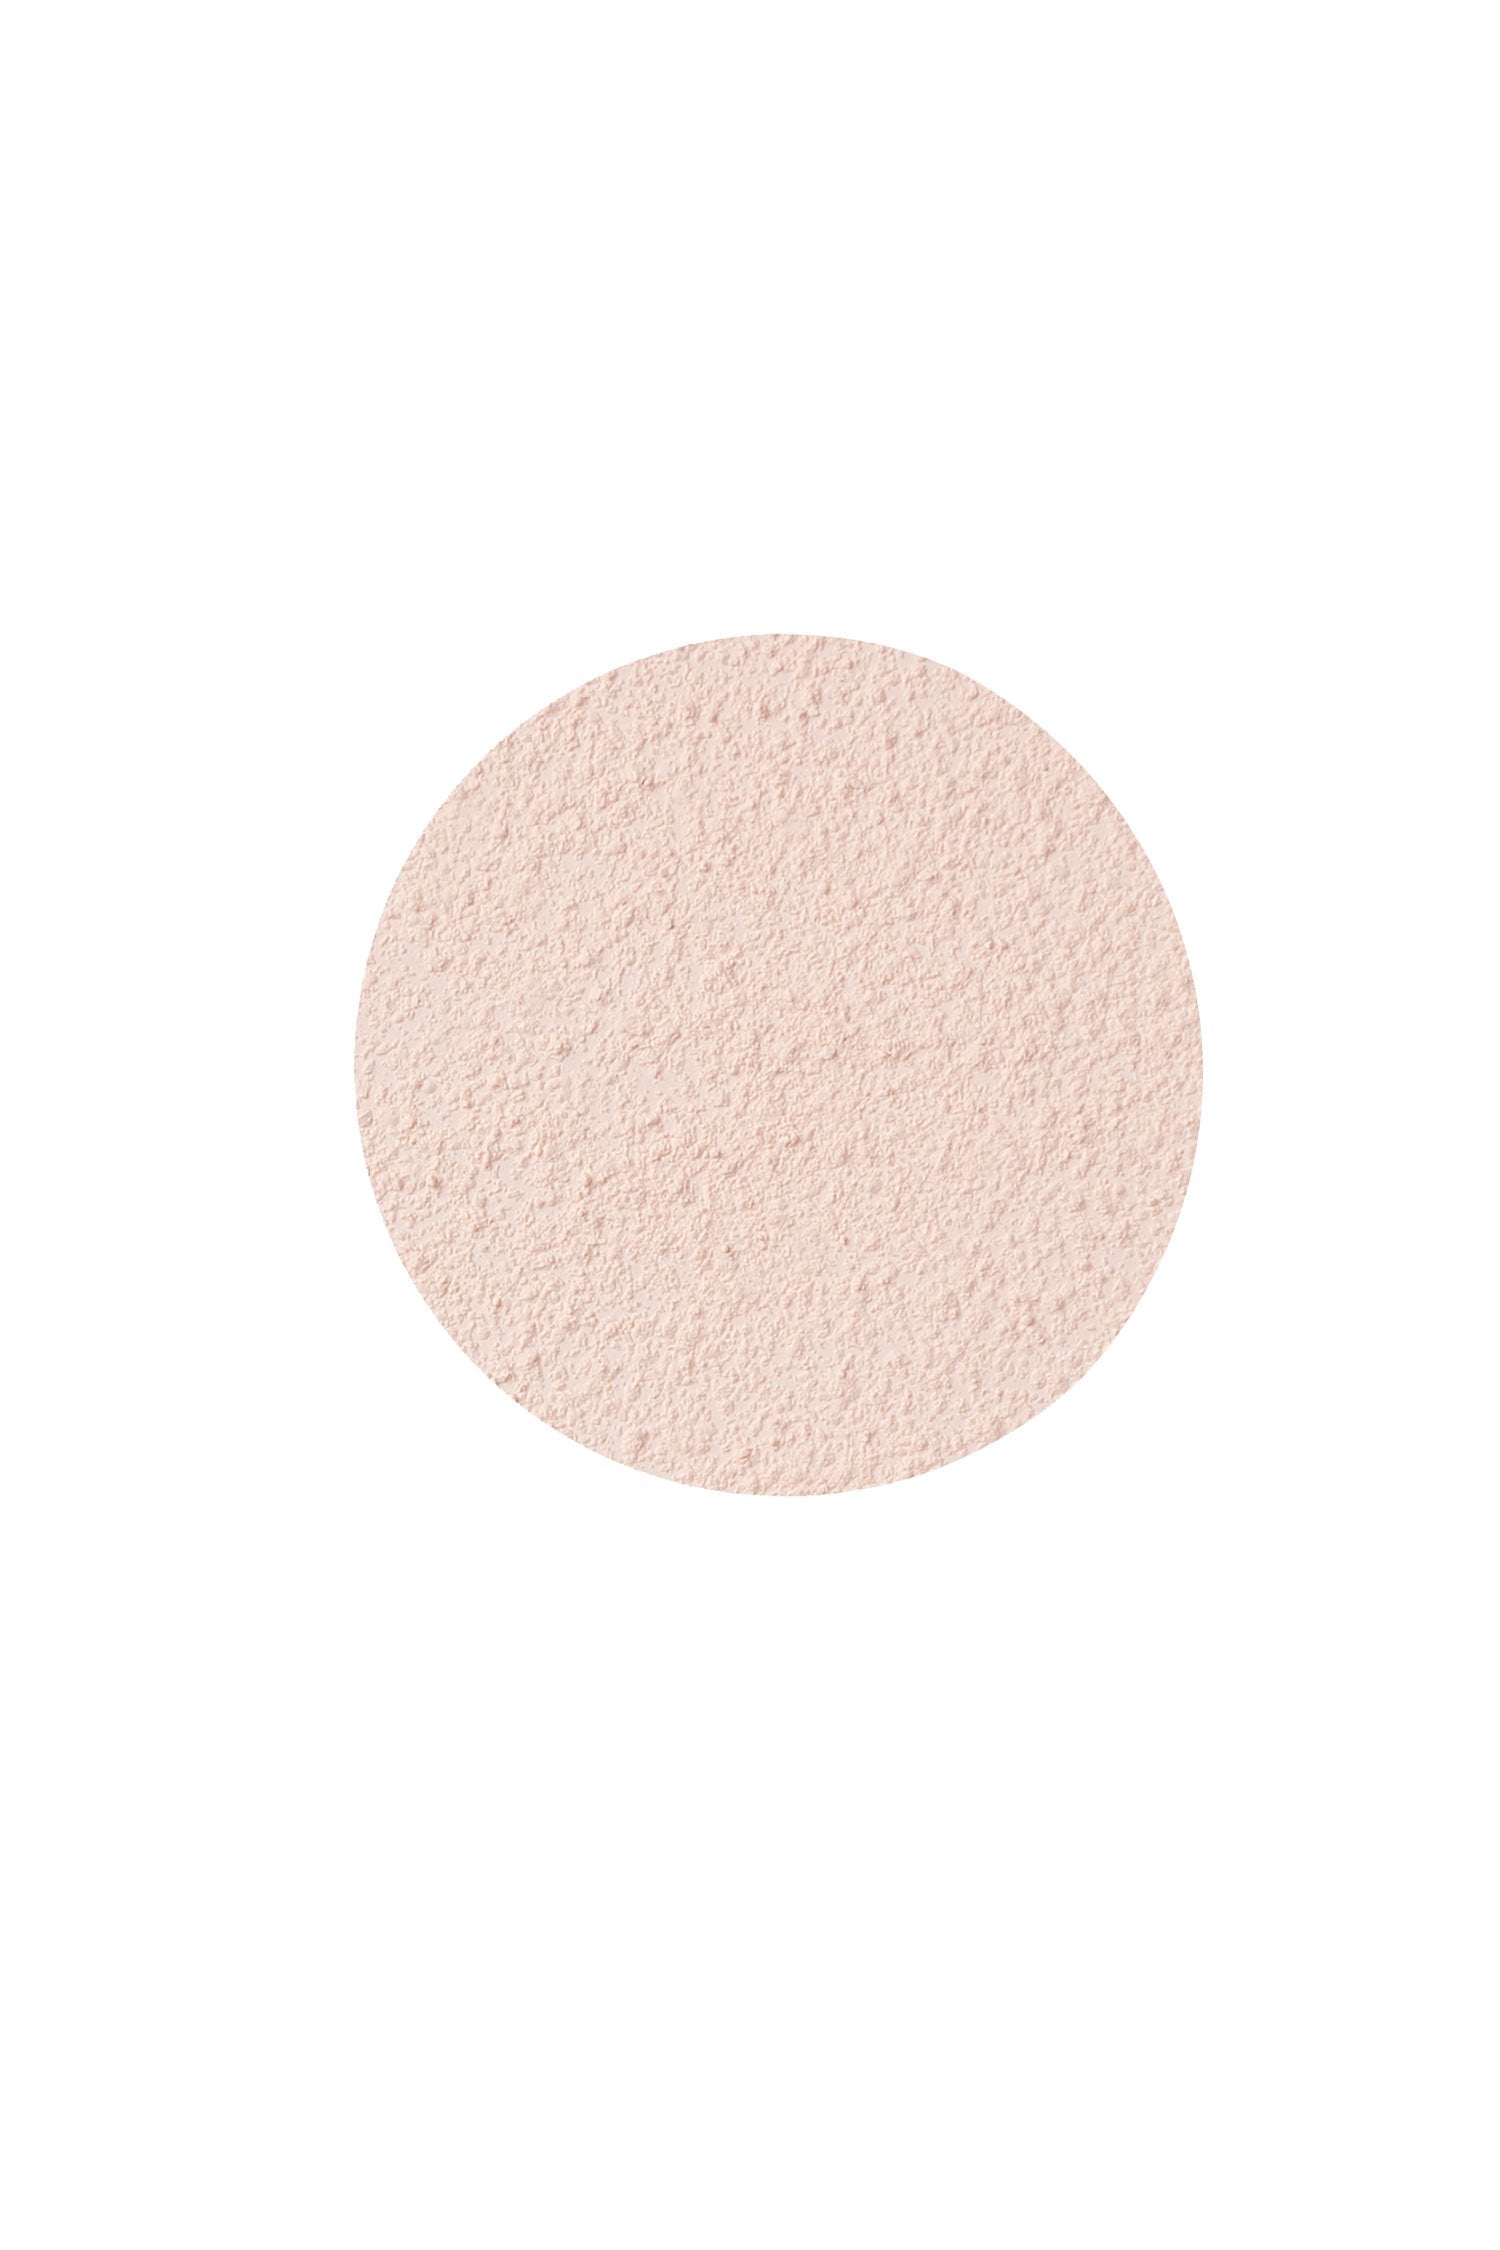 Mini Loose Light Beige Powder (Refill Only) for portable compact case